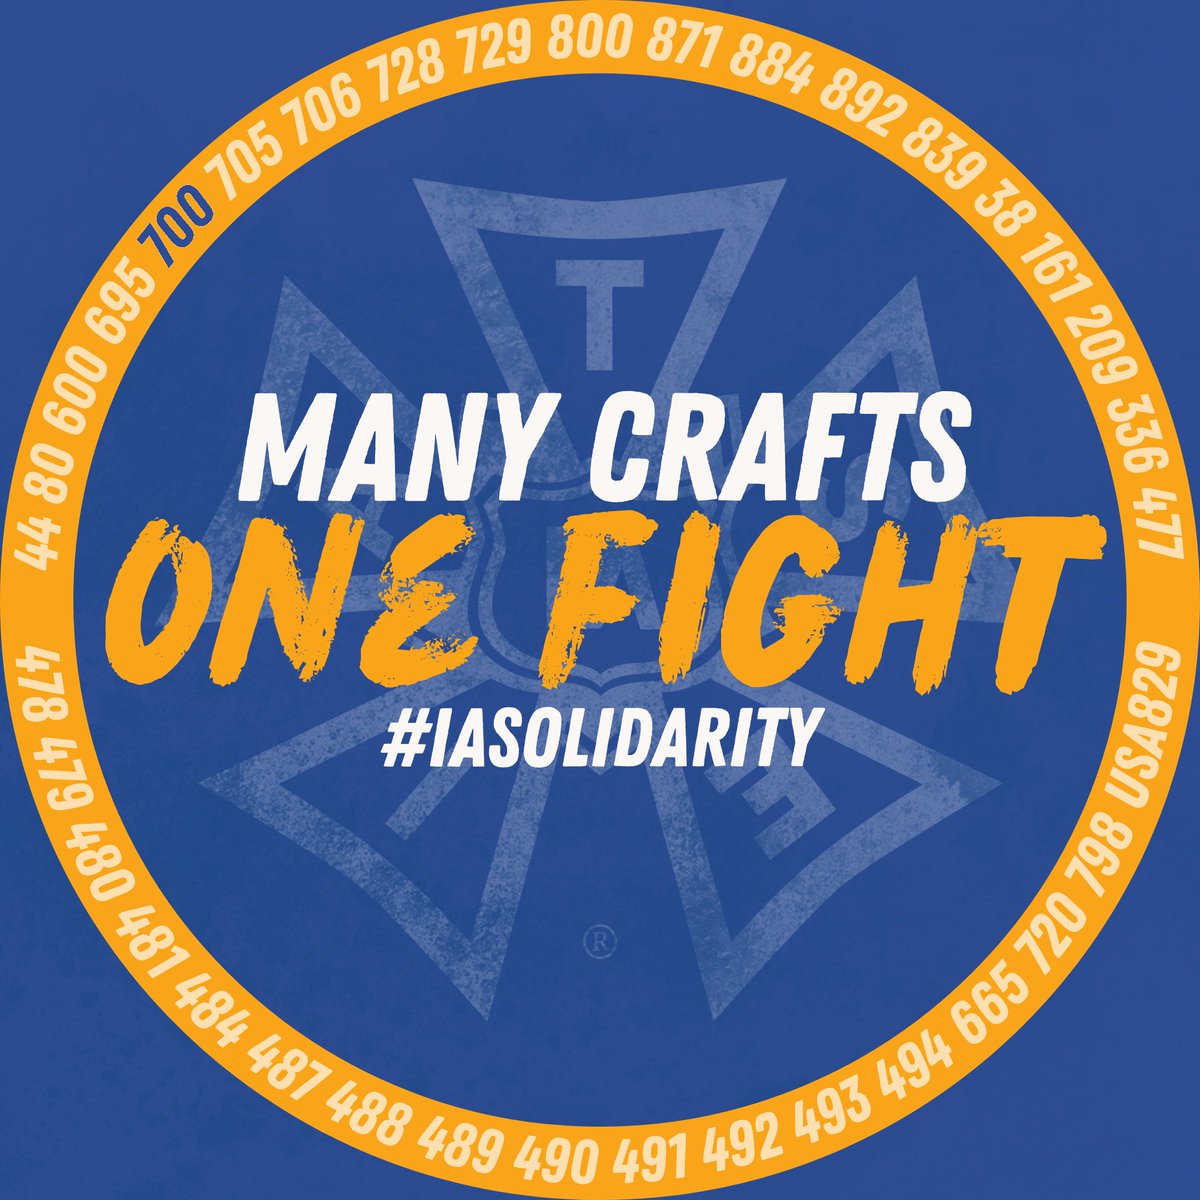 I back our @MPEG700 and @IATSE bargaining teams pushing for a fair contract! #ManyCraftsOneFight #IAsolidarity